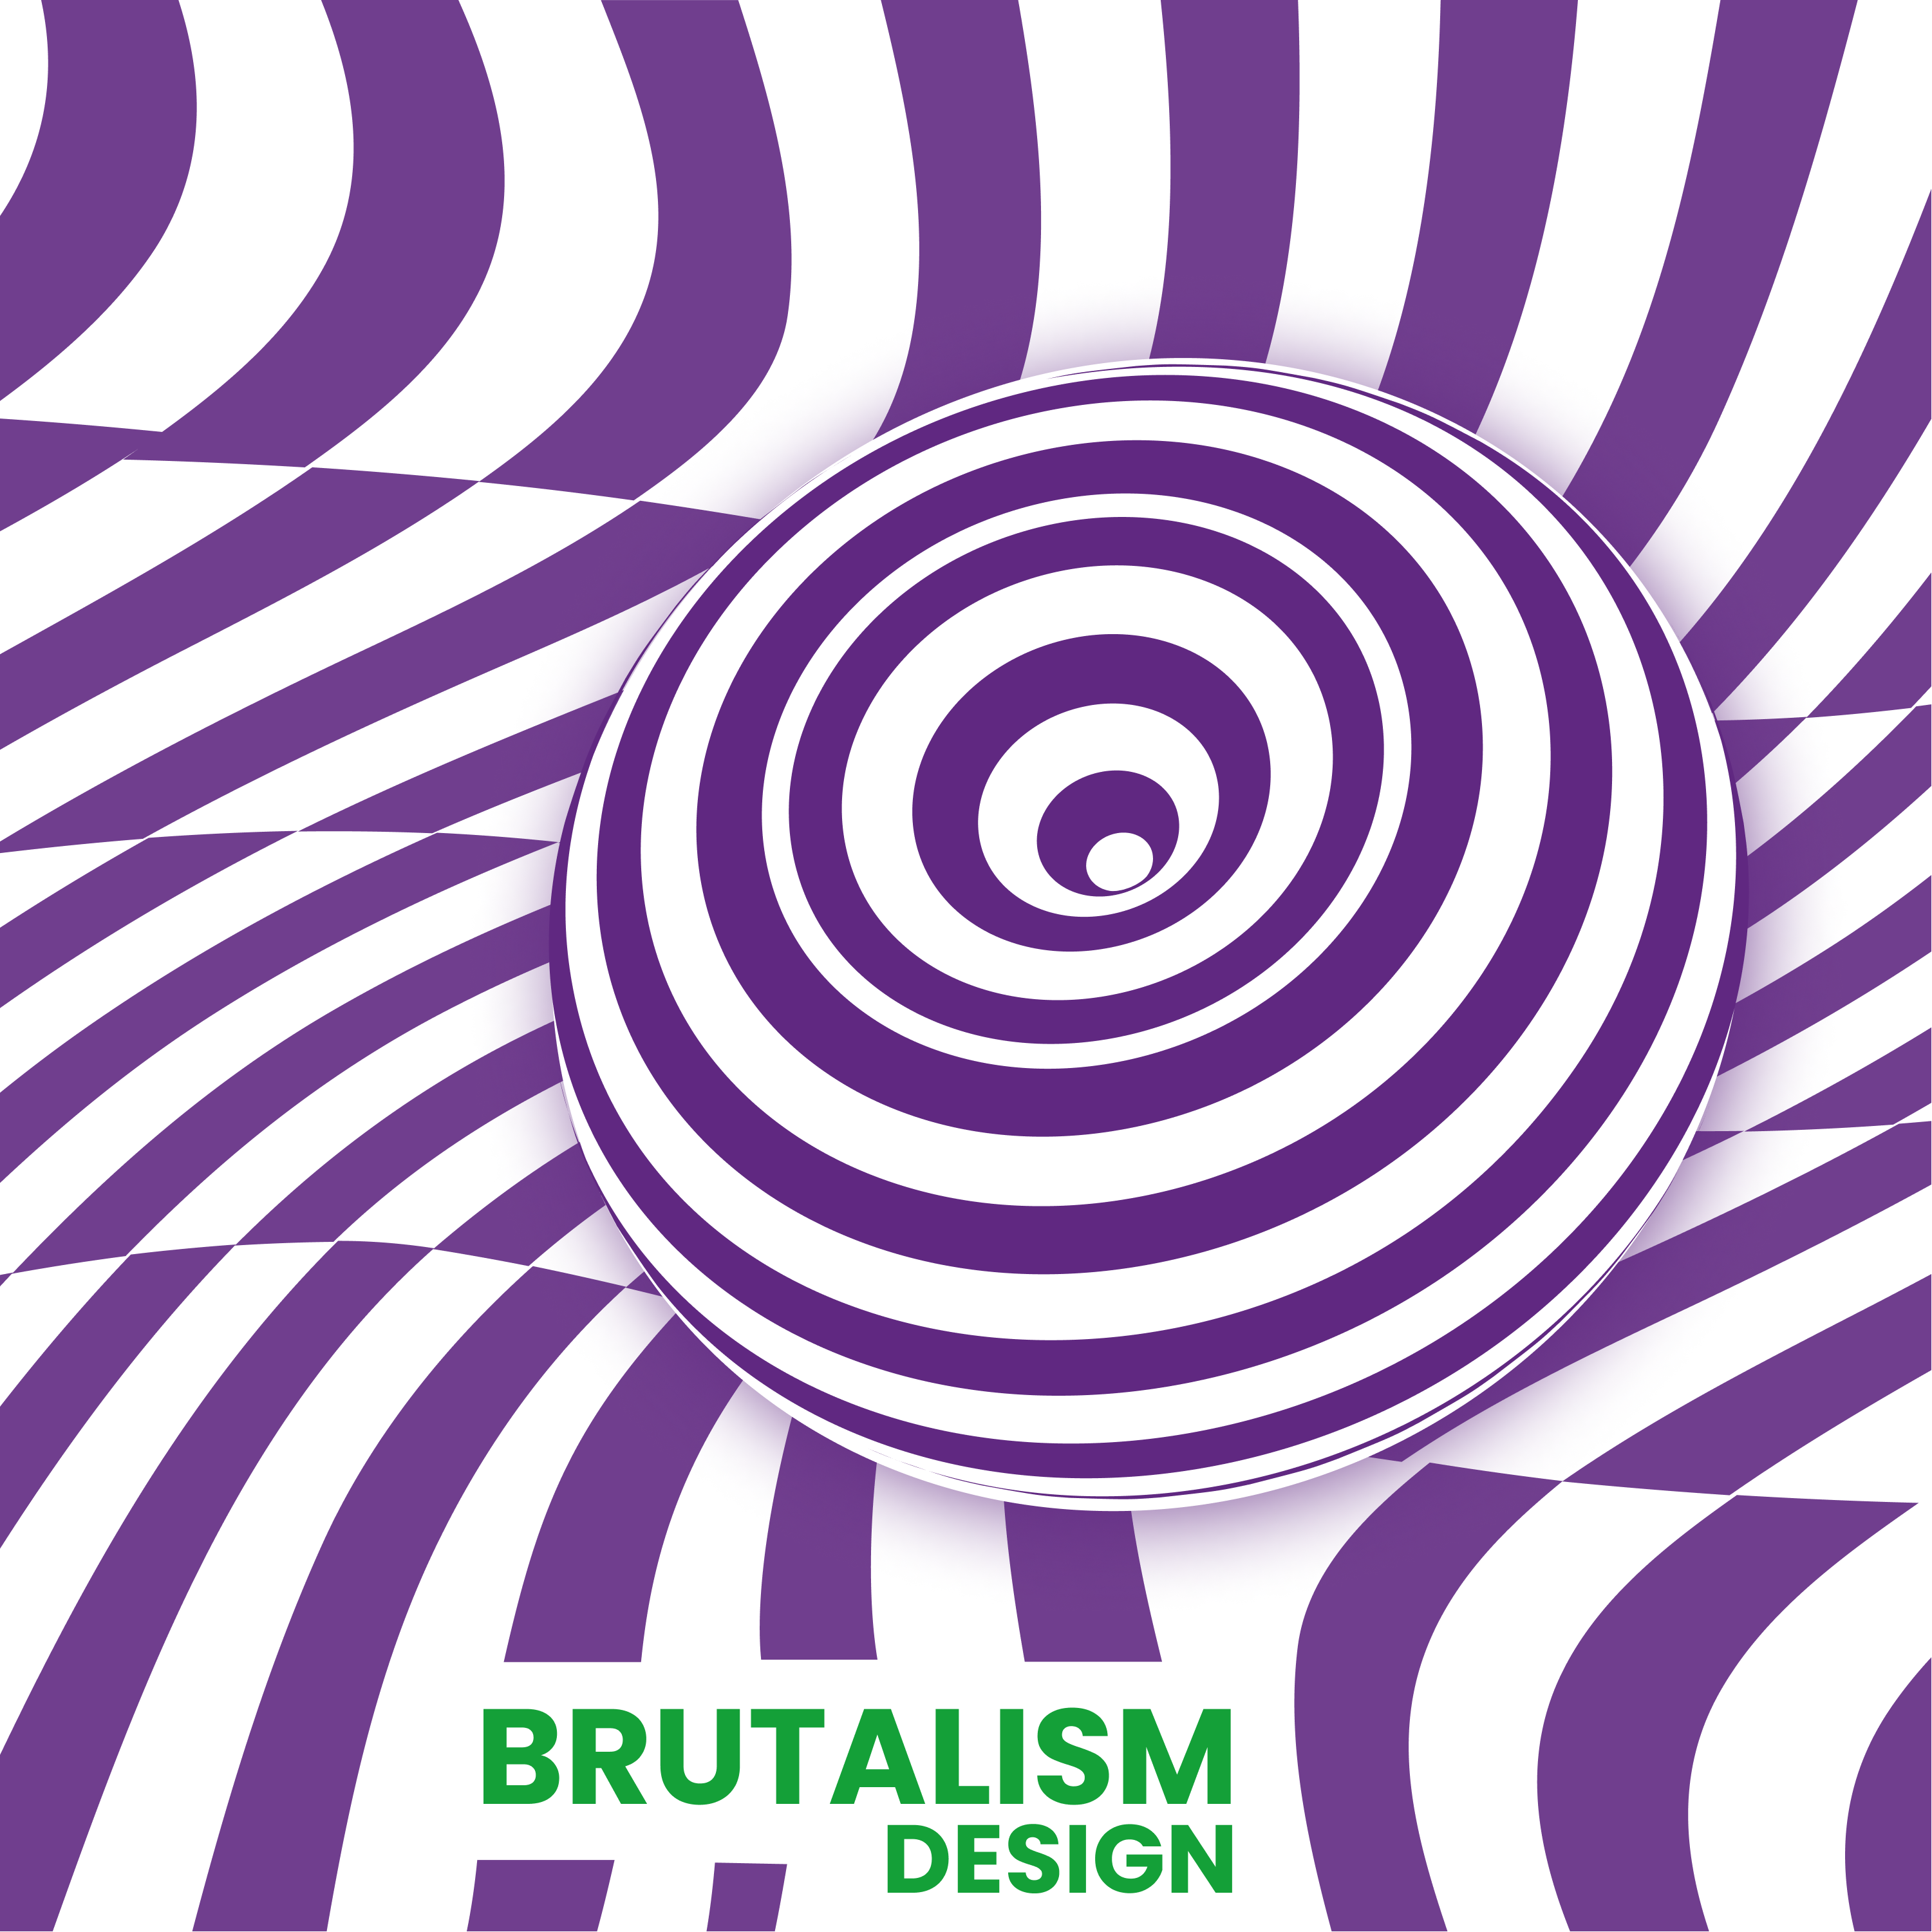 Brutalism , An Architectural Movement